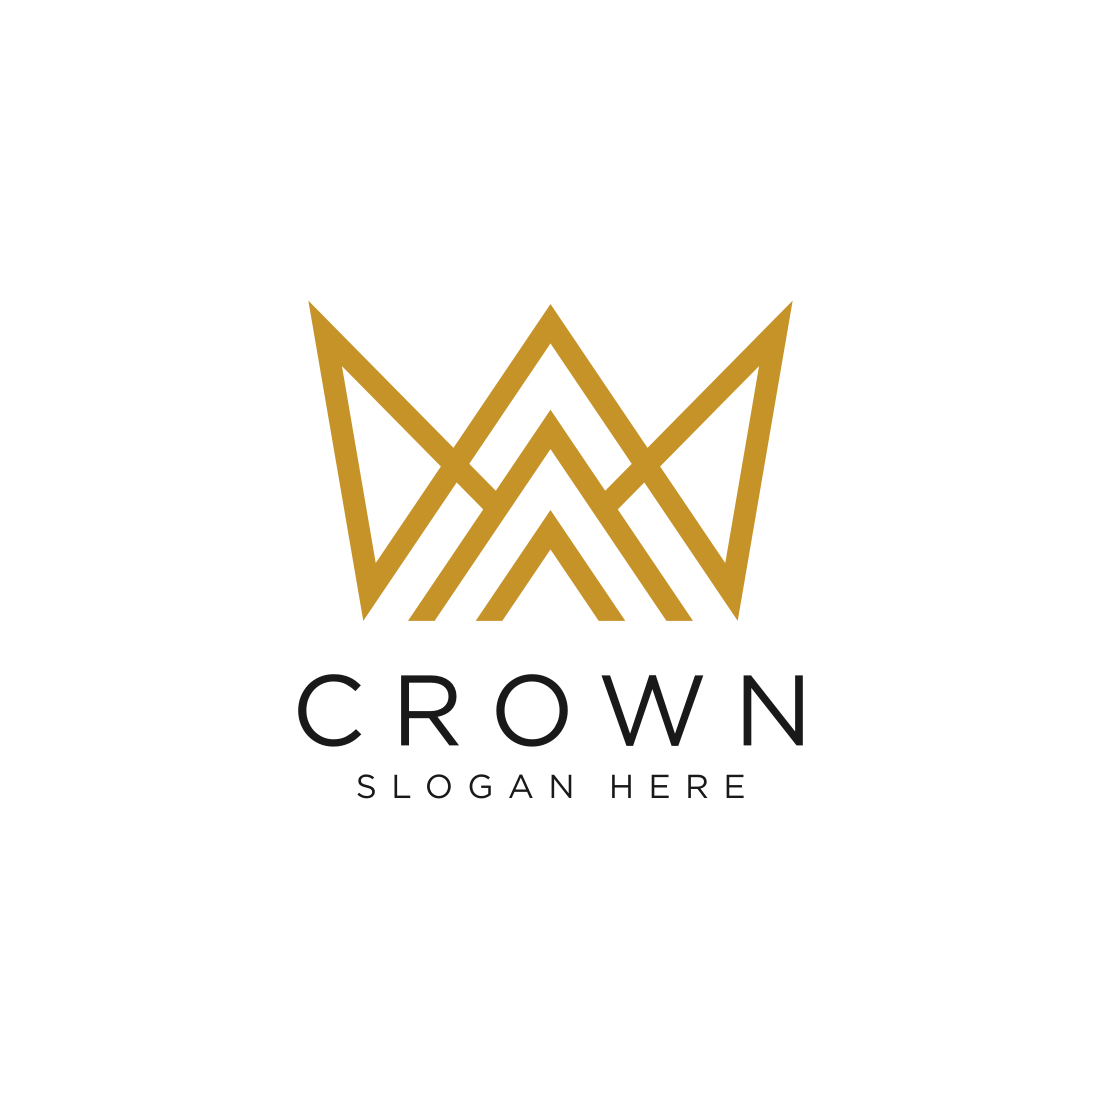 Crown logo is shown on a white background.